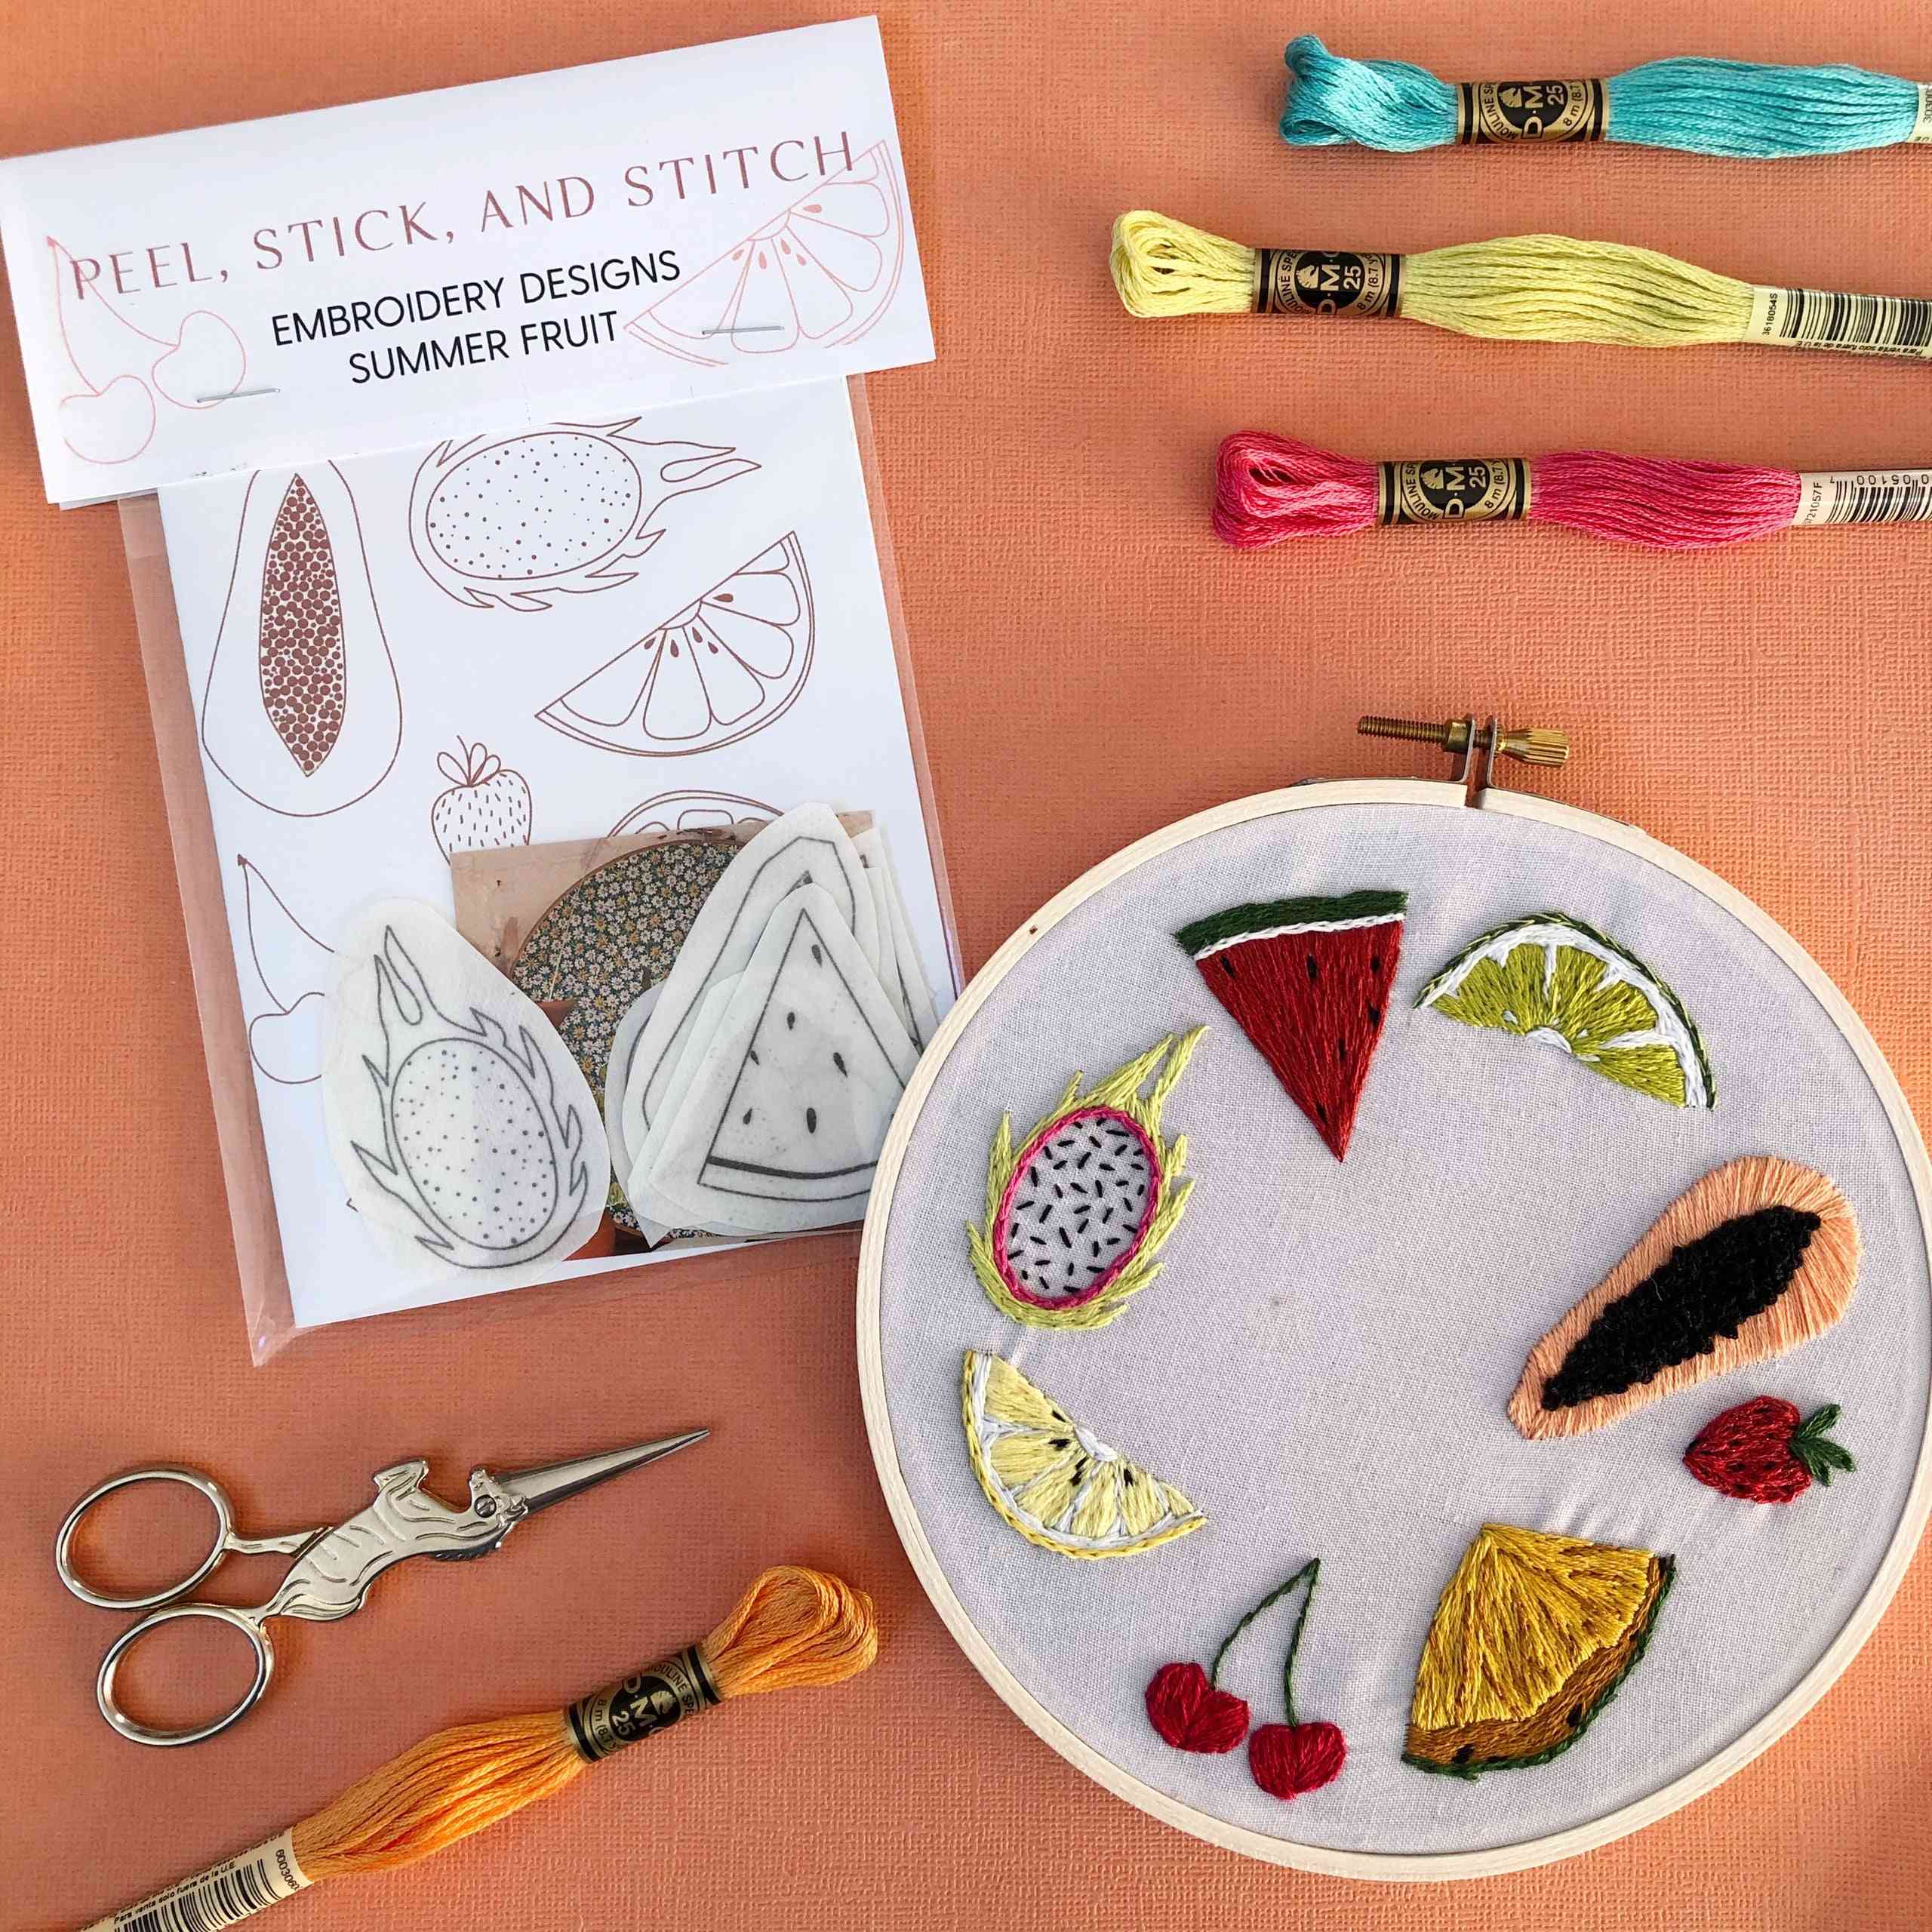 Diy Embroidery Pattern Peel Stick And Stitch Fruit Designs